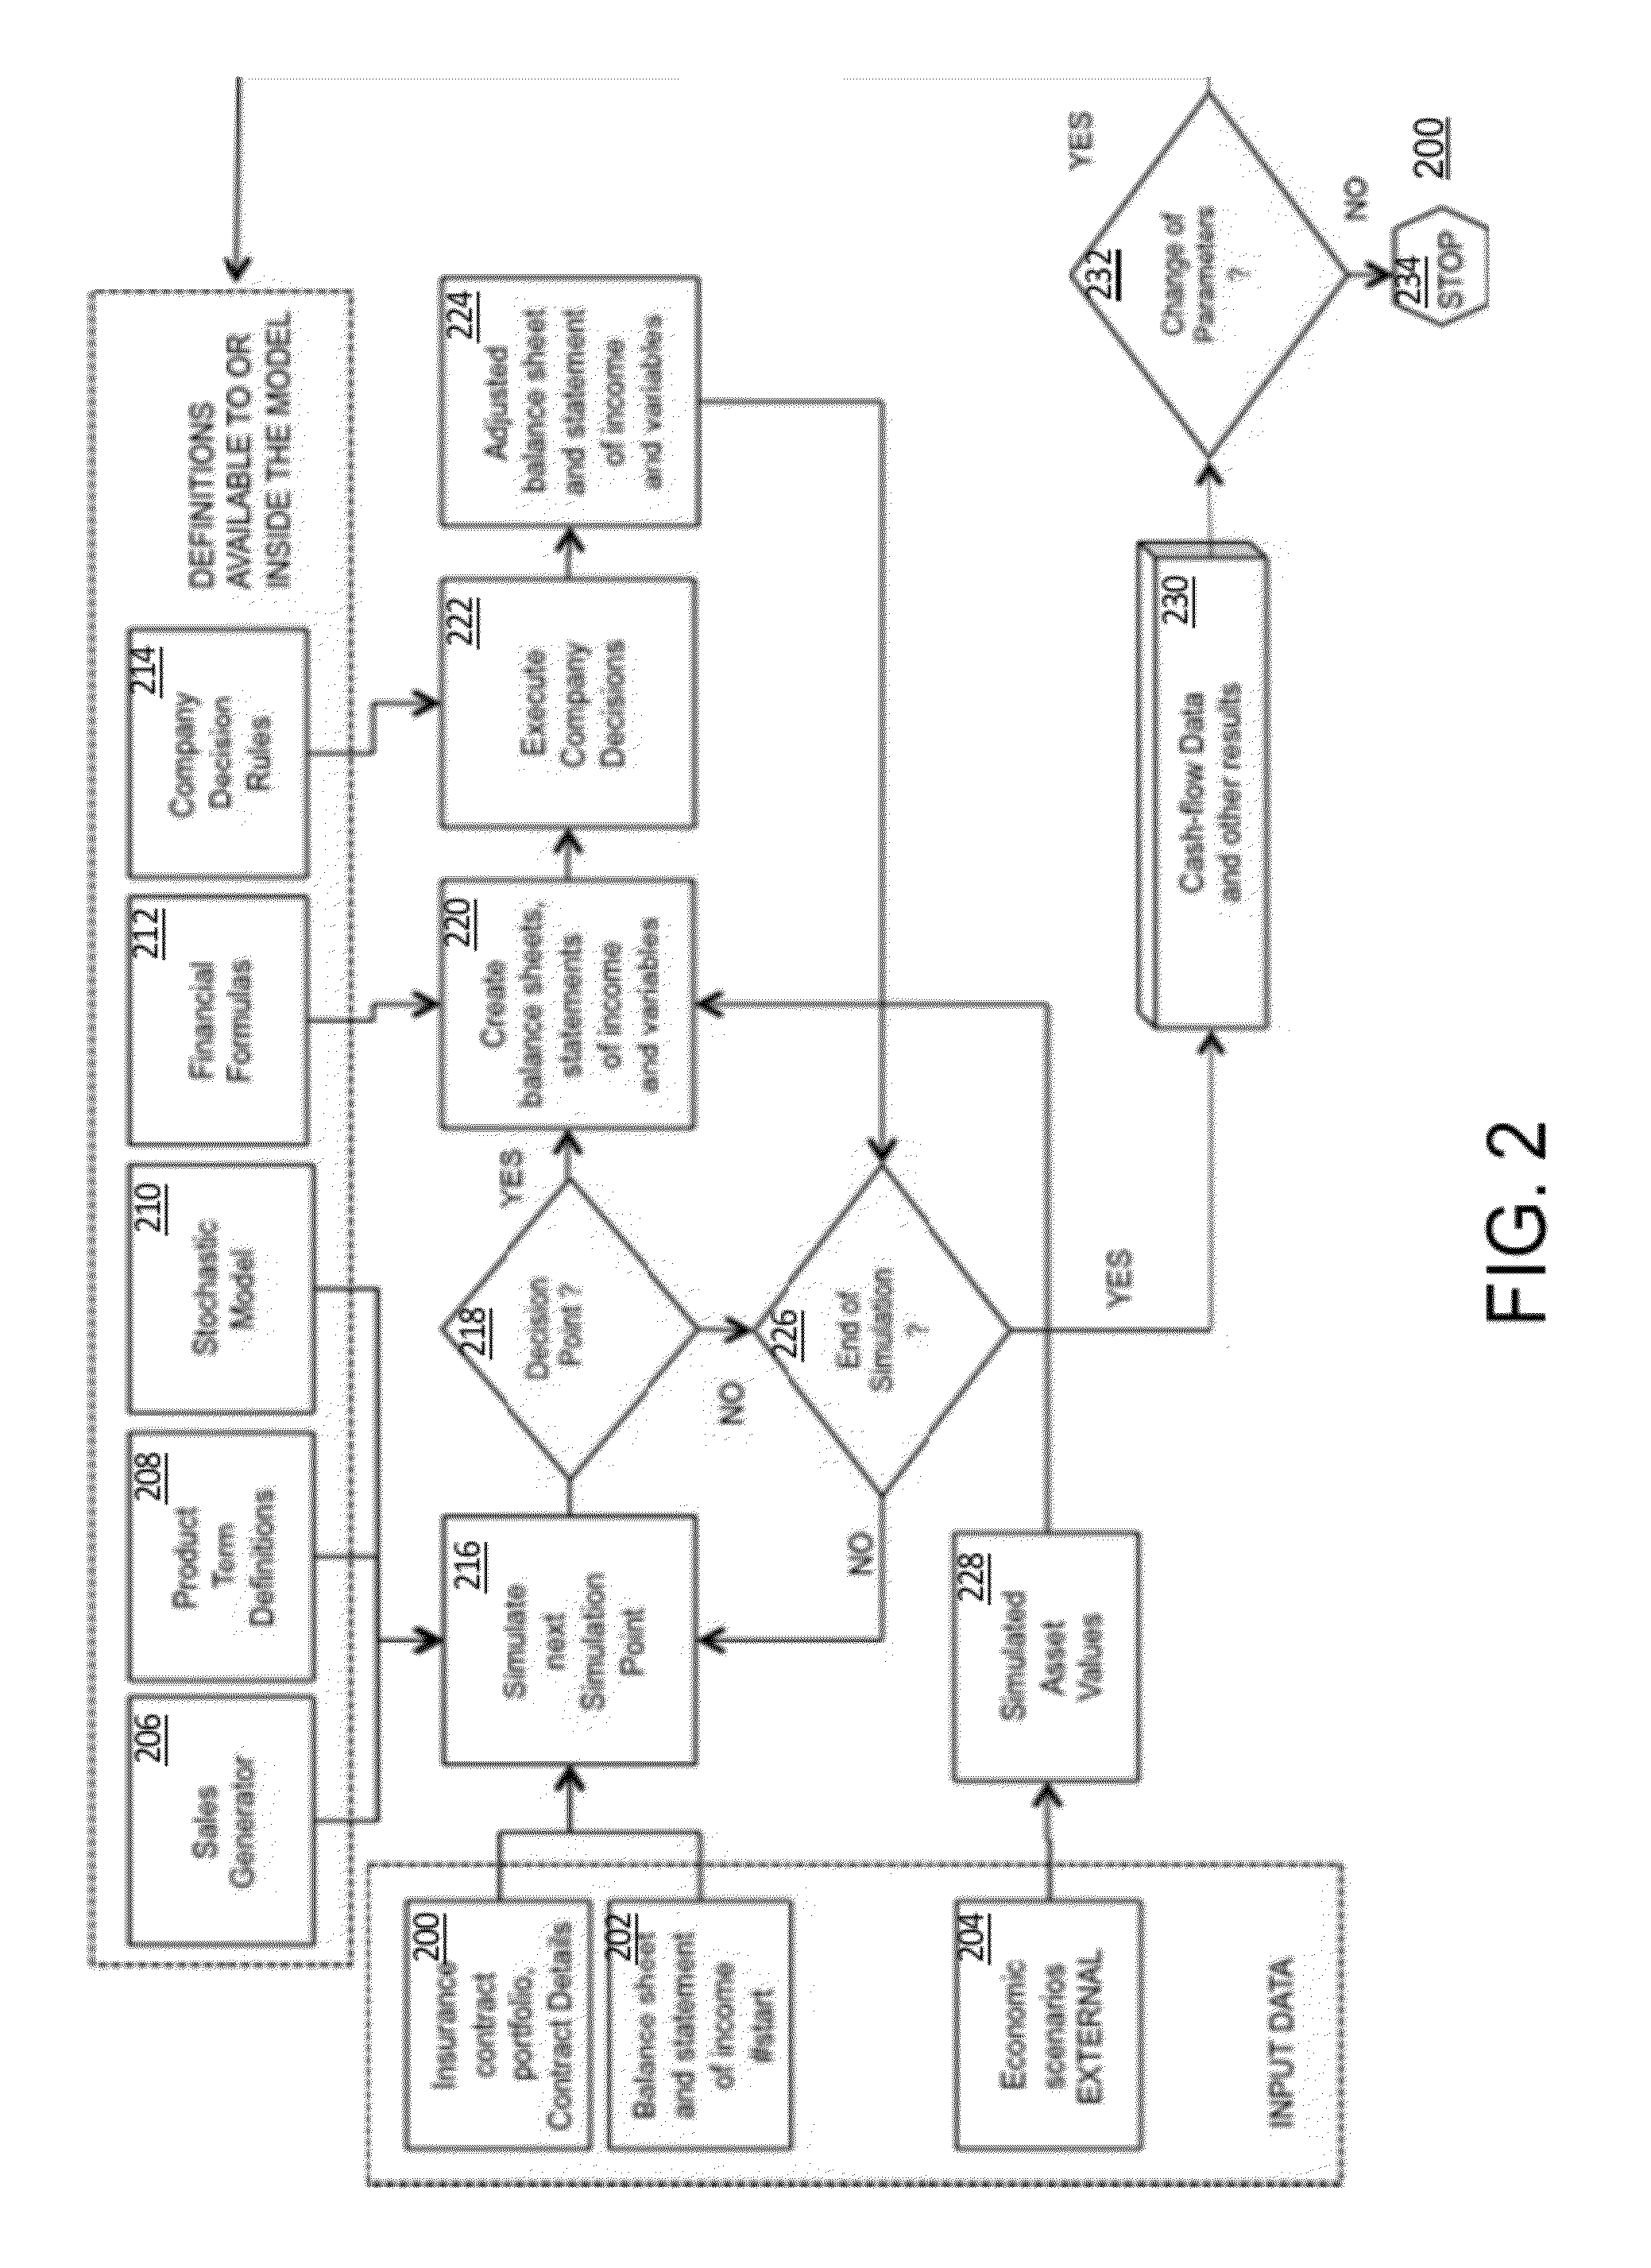 Method and system for analyzing insurance contracts and insurance contract portfolios